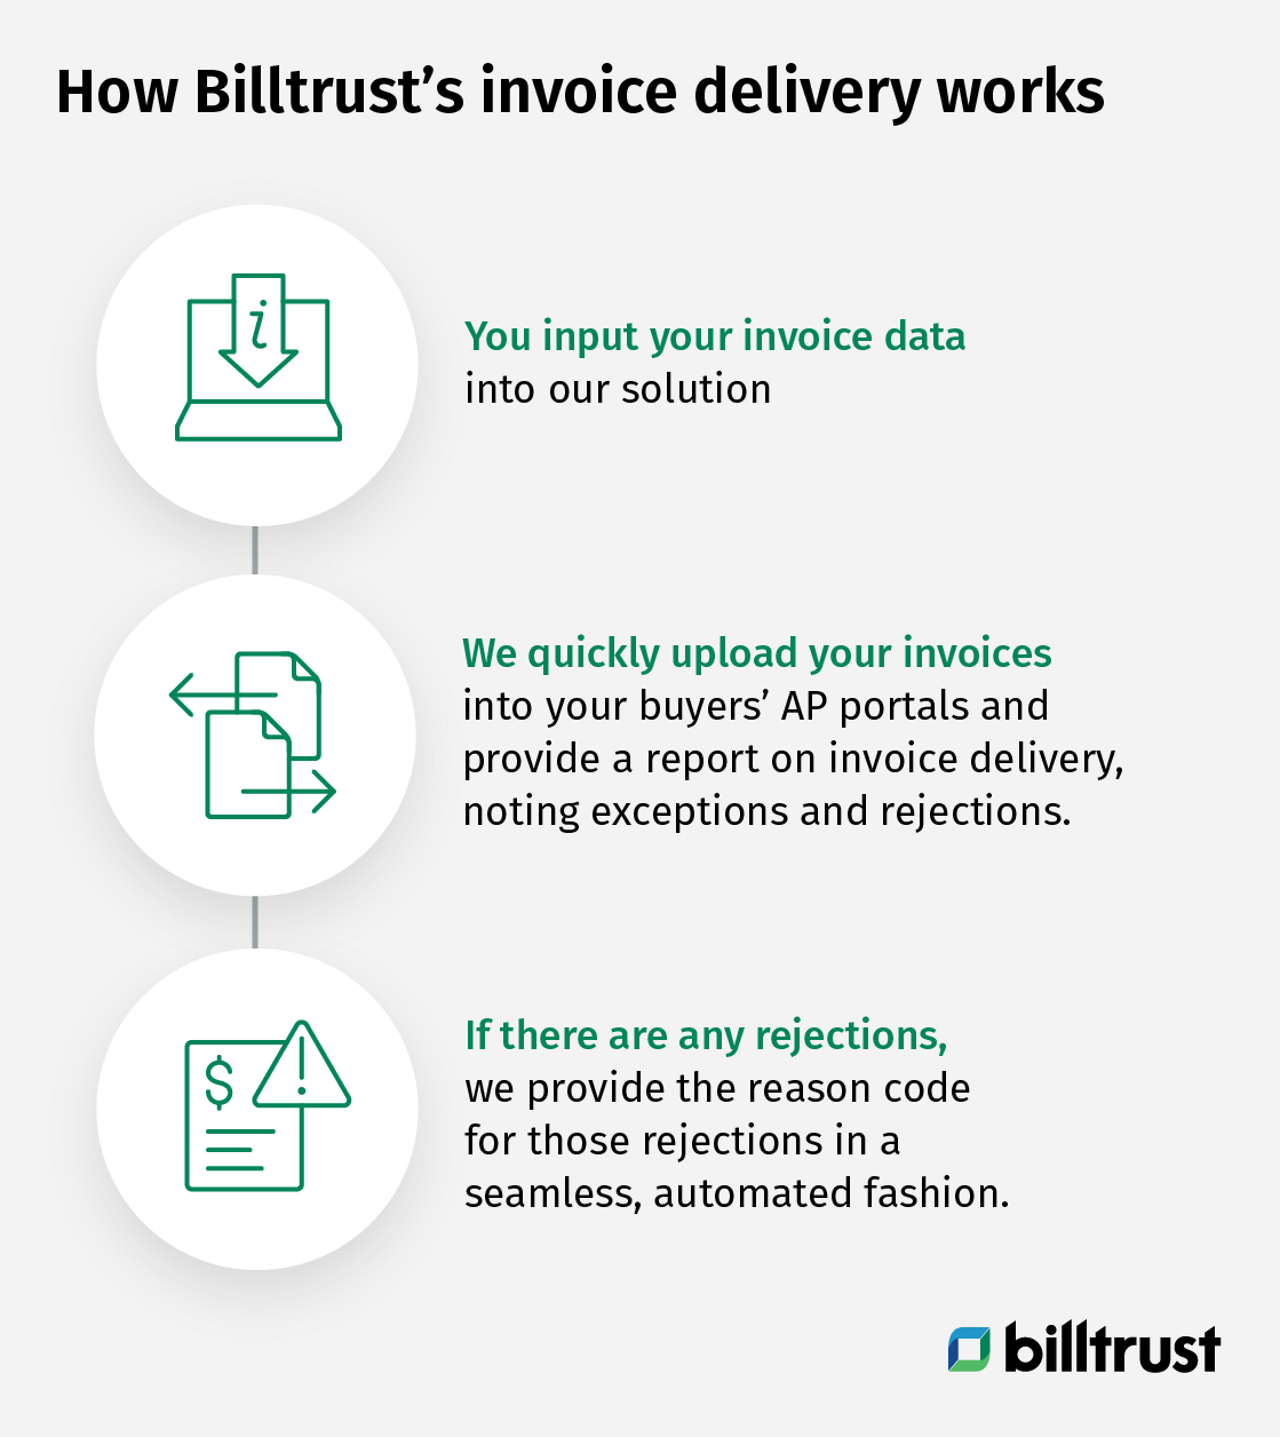 how billtrust's invoice delivery works graphic